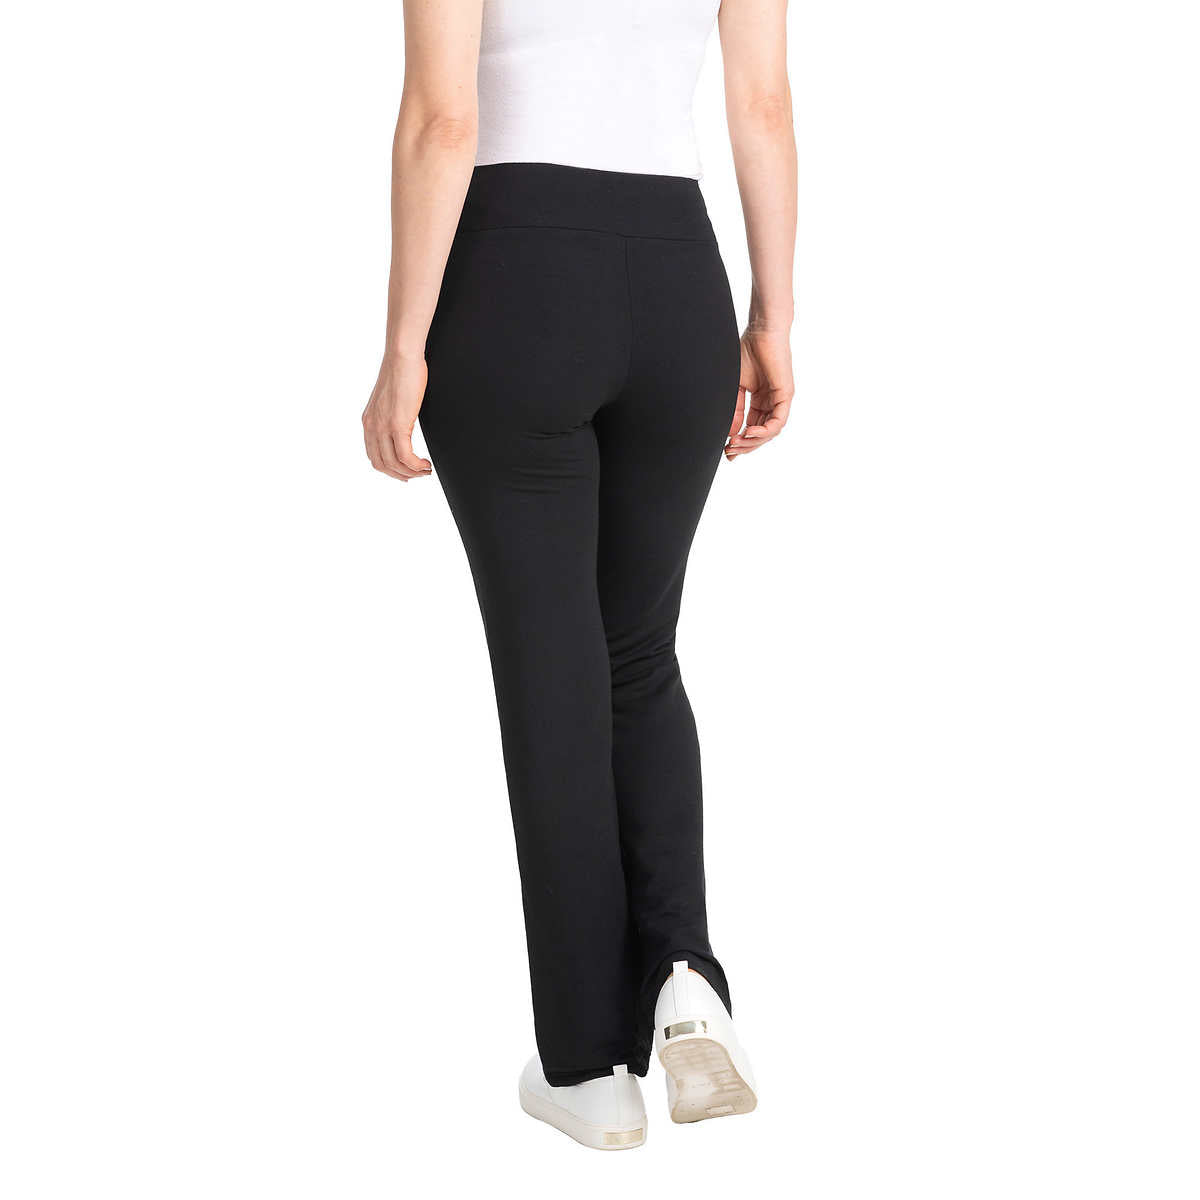 Soft and lightweight Pull-On Knit Pant XL